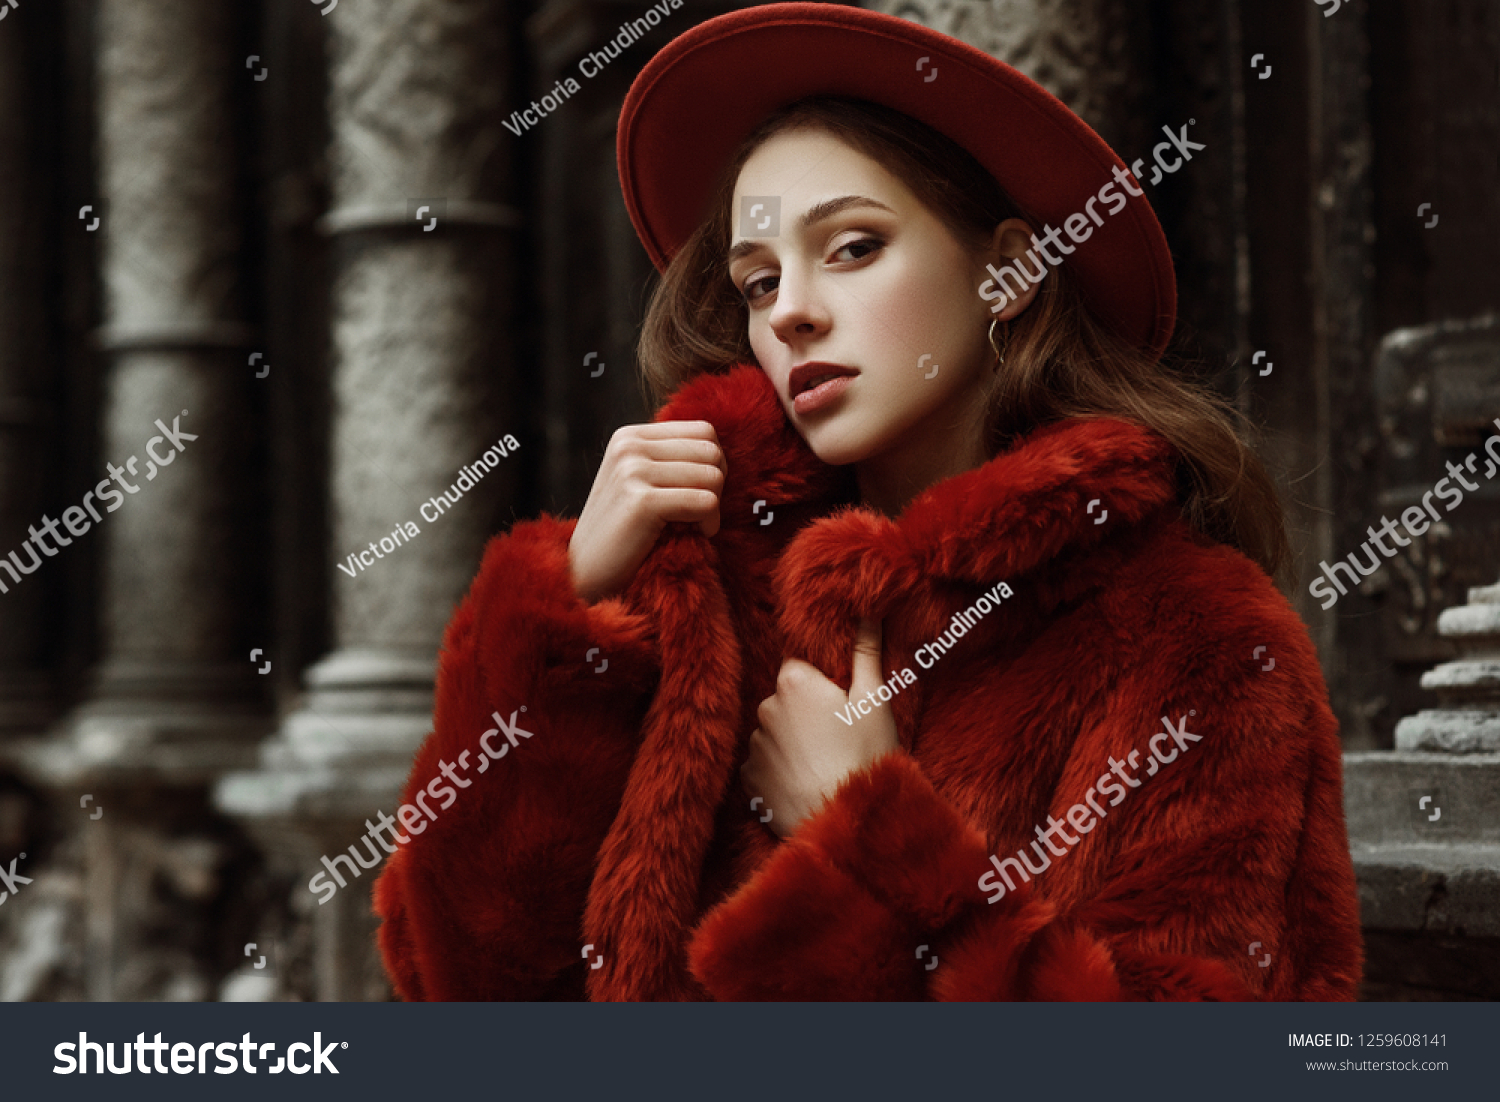 Outdoor close up fashion portrait of young beautiful confident woman wearing trendy orange faux fur coat, hat, silvery hoop earrings, posing in street of european city. Copy, empty space for text
 #1259608141